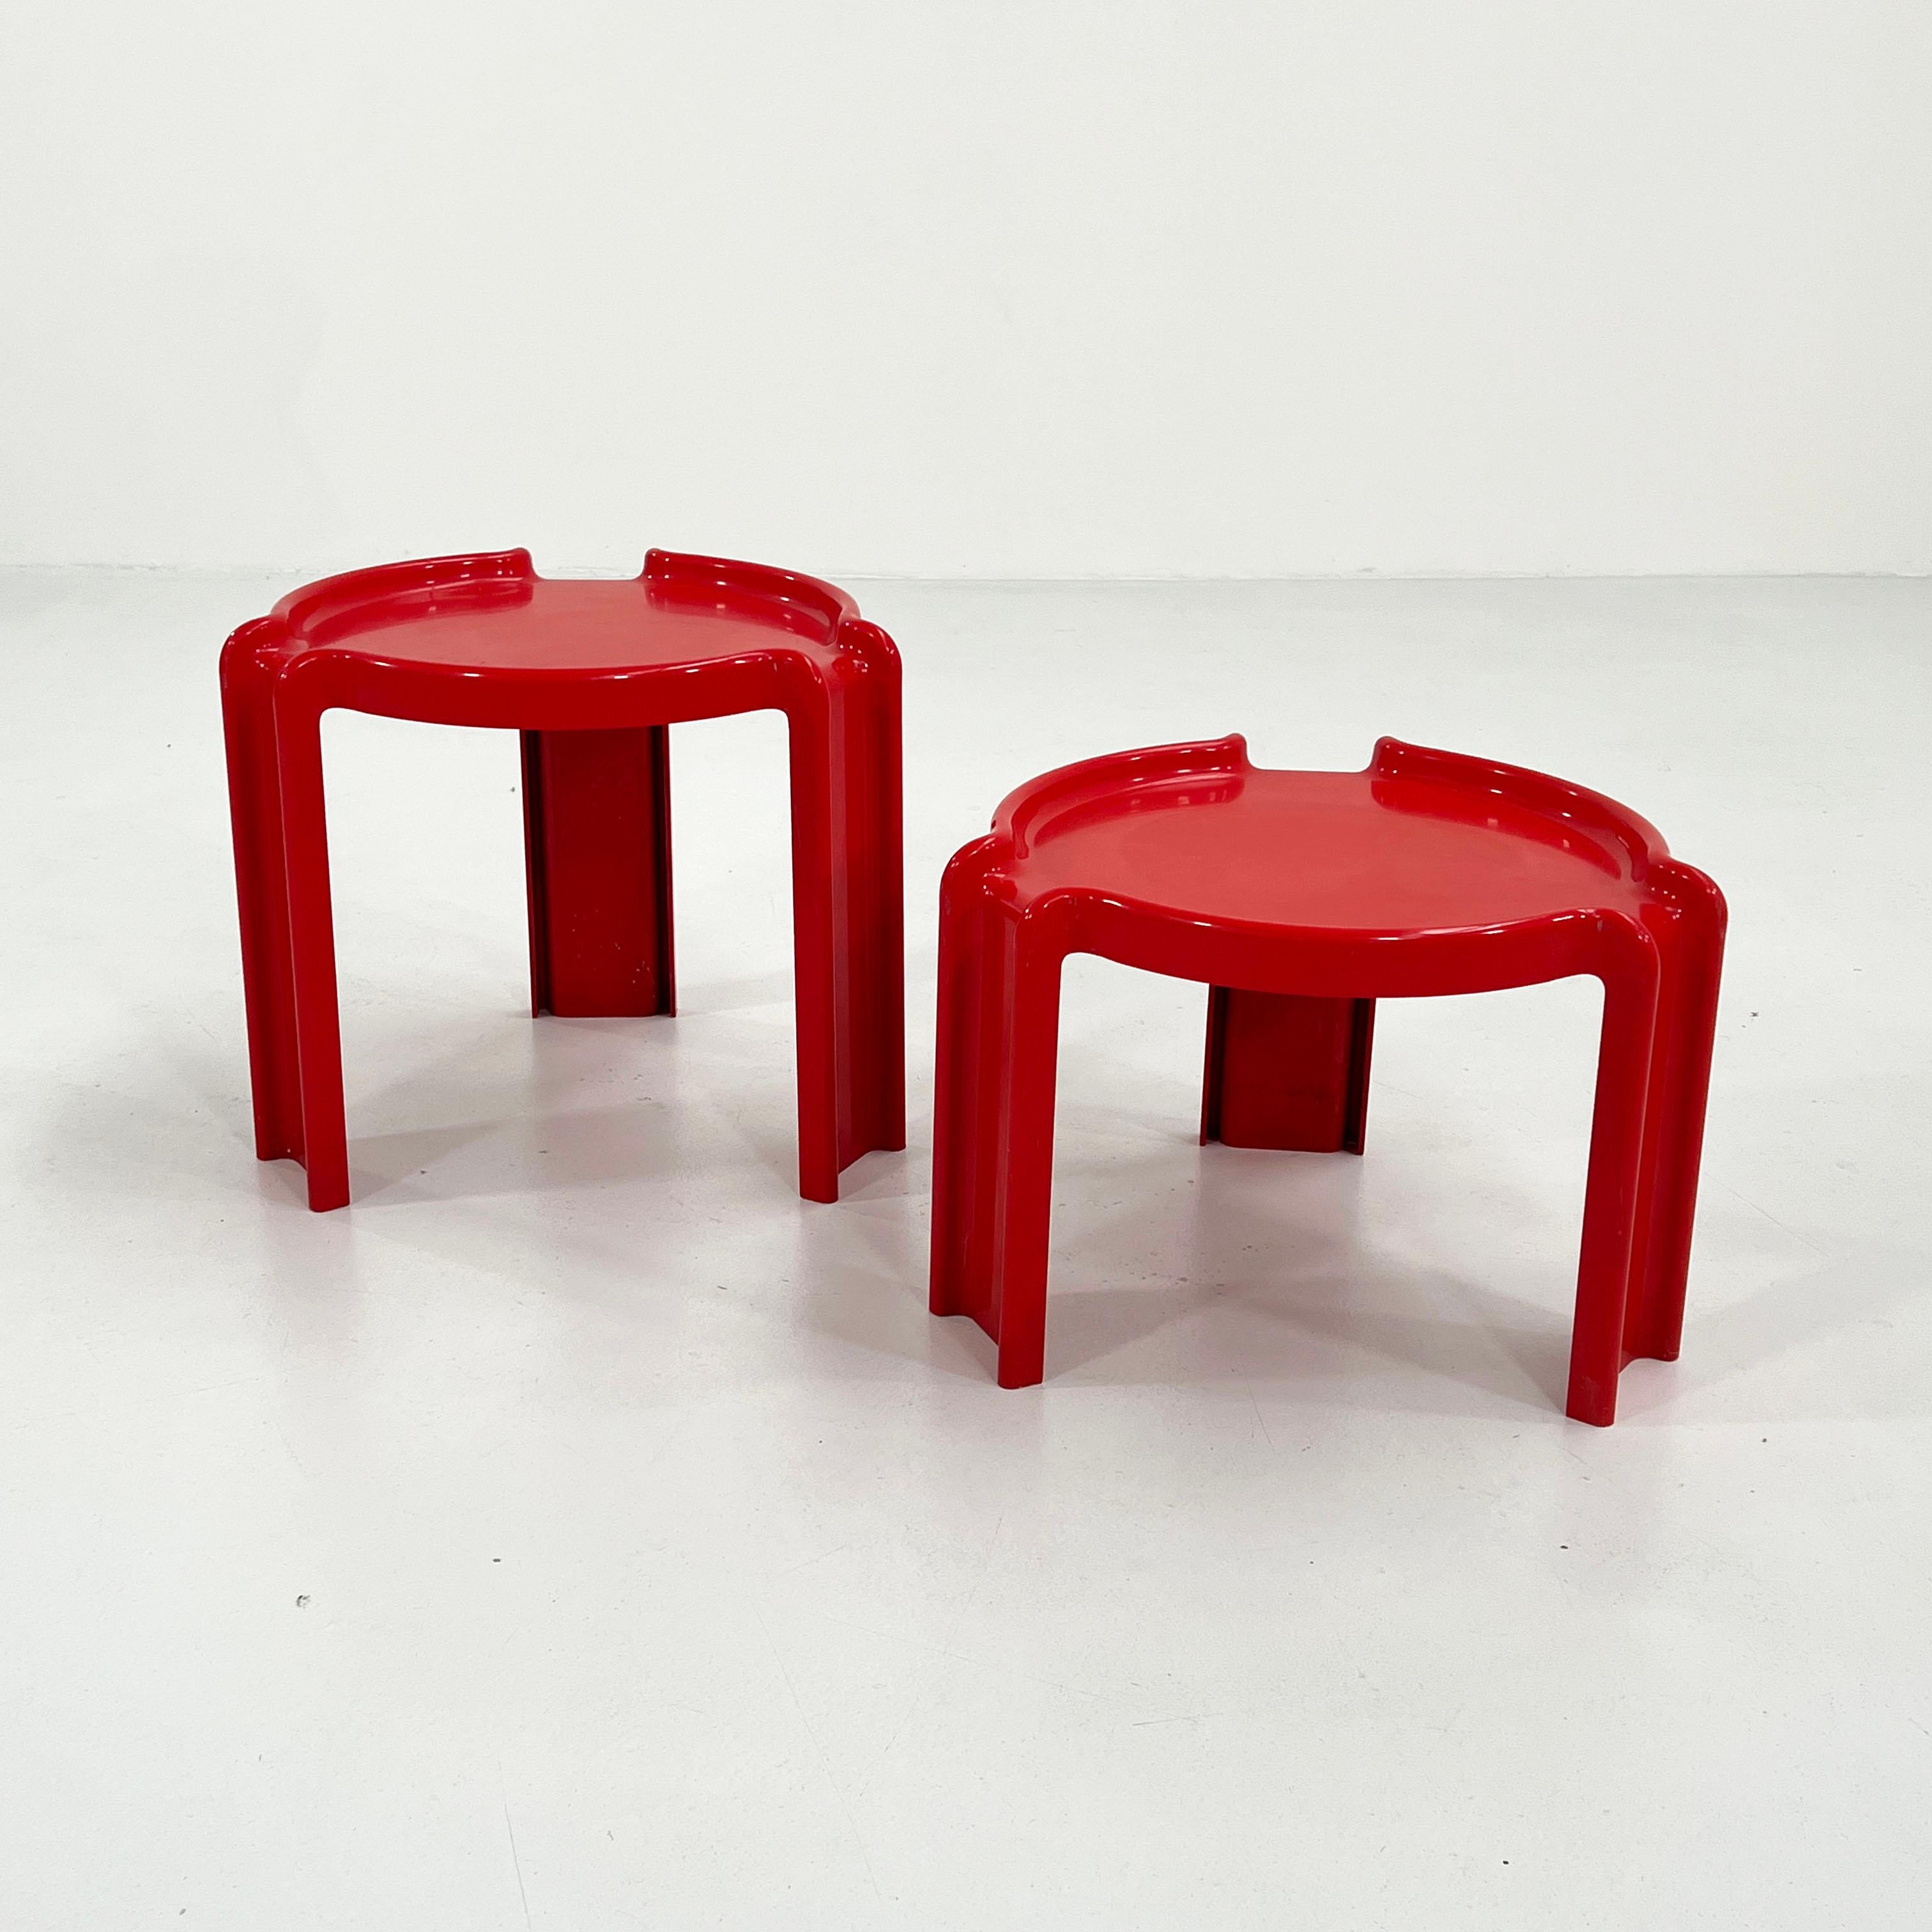 Designer - Giotto Stoppino
Producer - Kartell
Model - Nesting Tables
Design Period - Seventies
Measurements - Width 47 cm x Depth 47 cm x Height 41 & 33 cm
Materials - Plastic
Color - Red
Condition - Good 
Comments - Light wear consistent with age